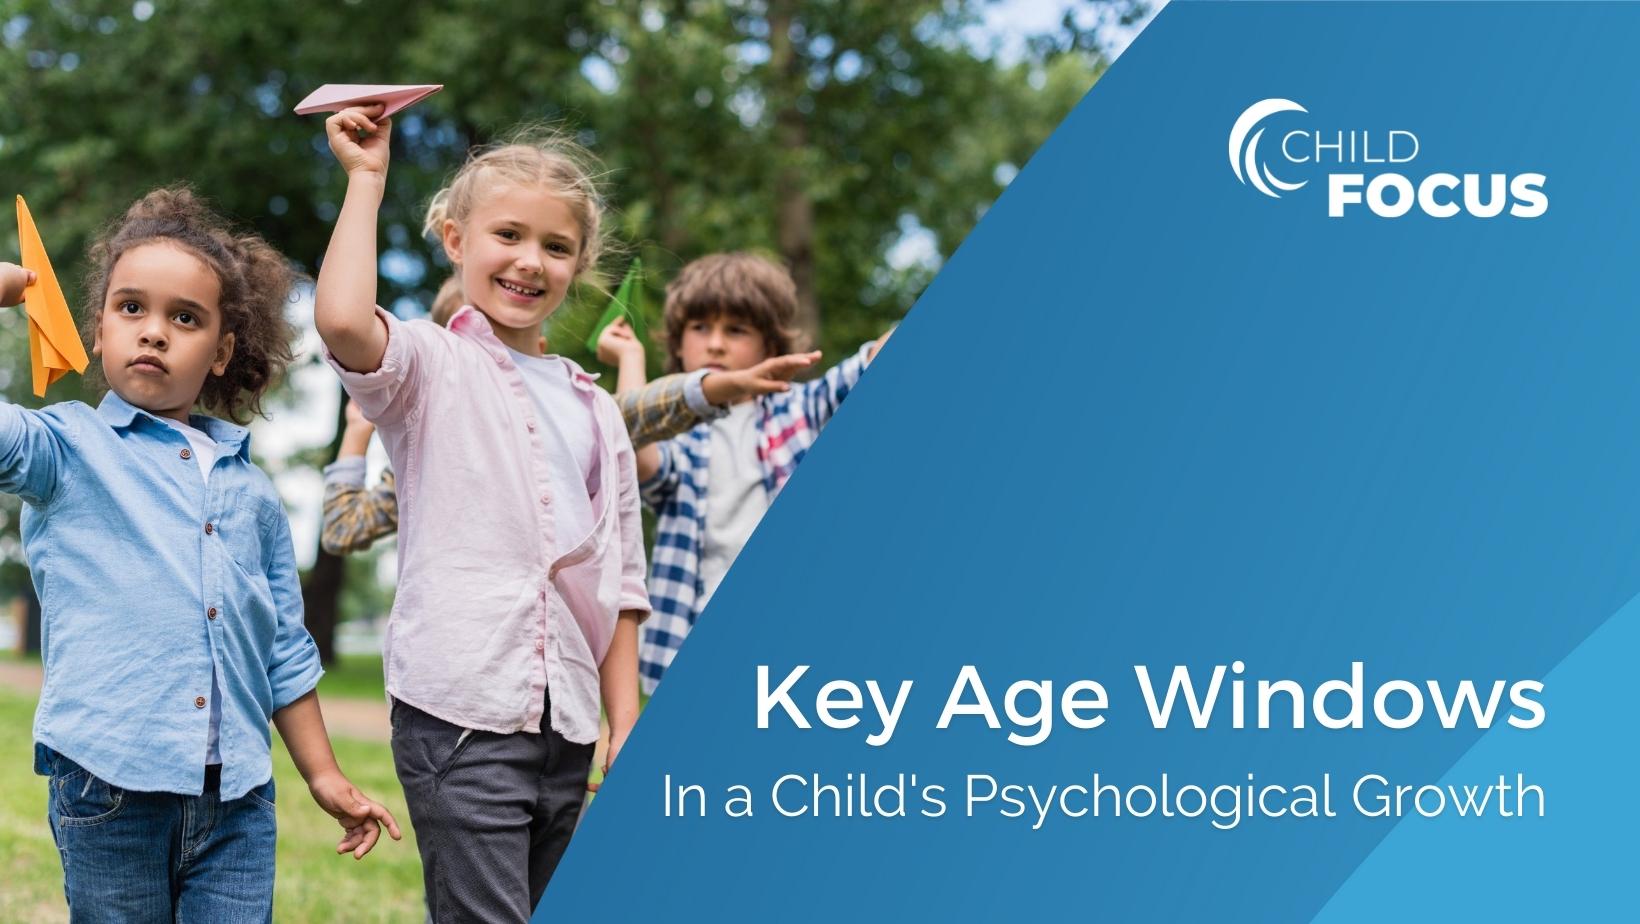 Kids throwing paper airplanes, picture saying Key Age Windows In a Child's Psychological Growth